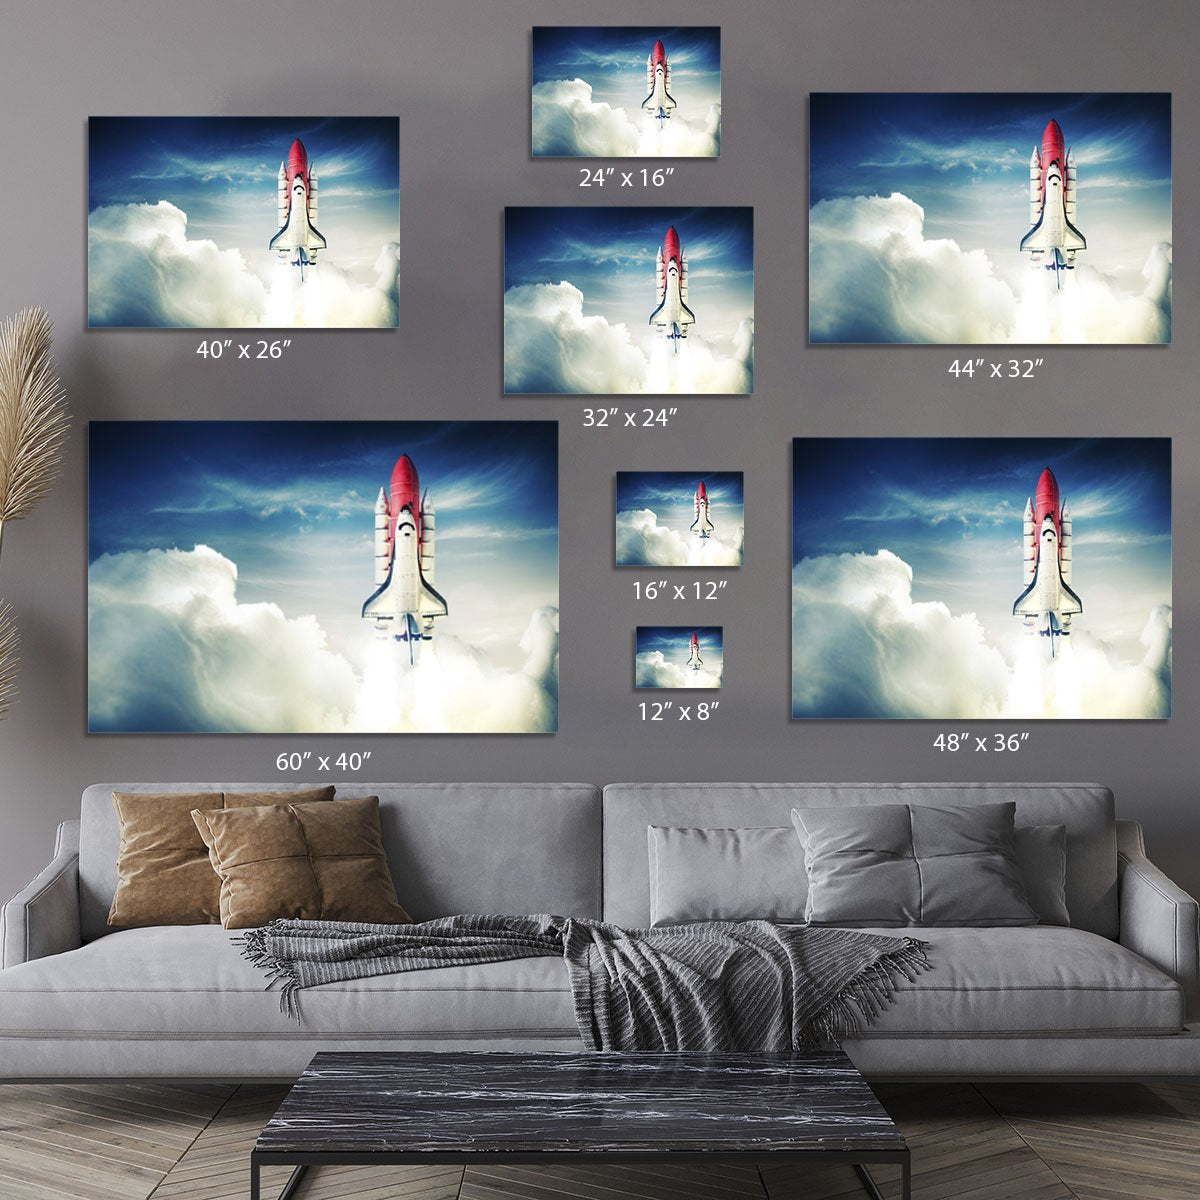 Space shuttle taking off on a mission Canvas Print or Poster